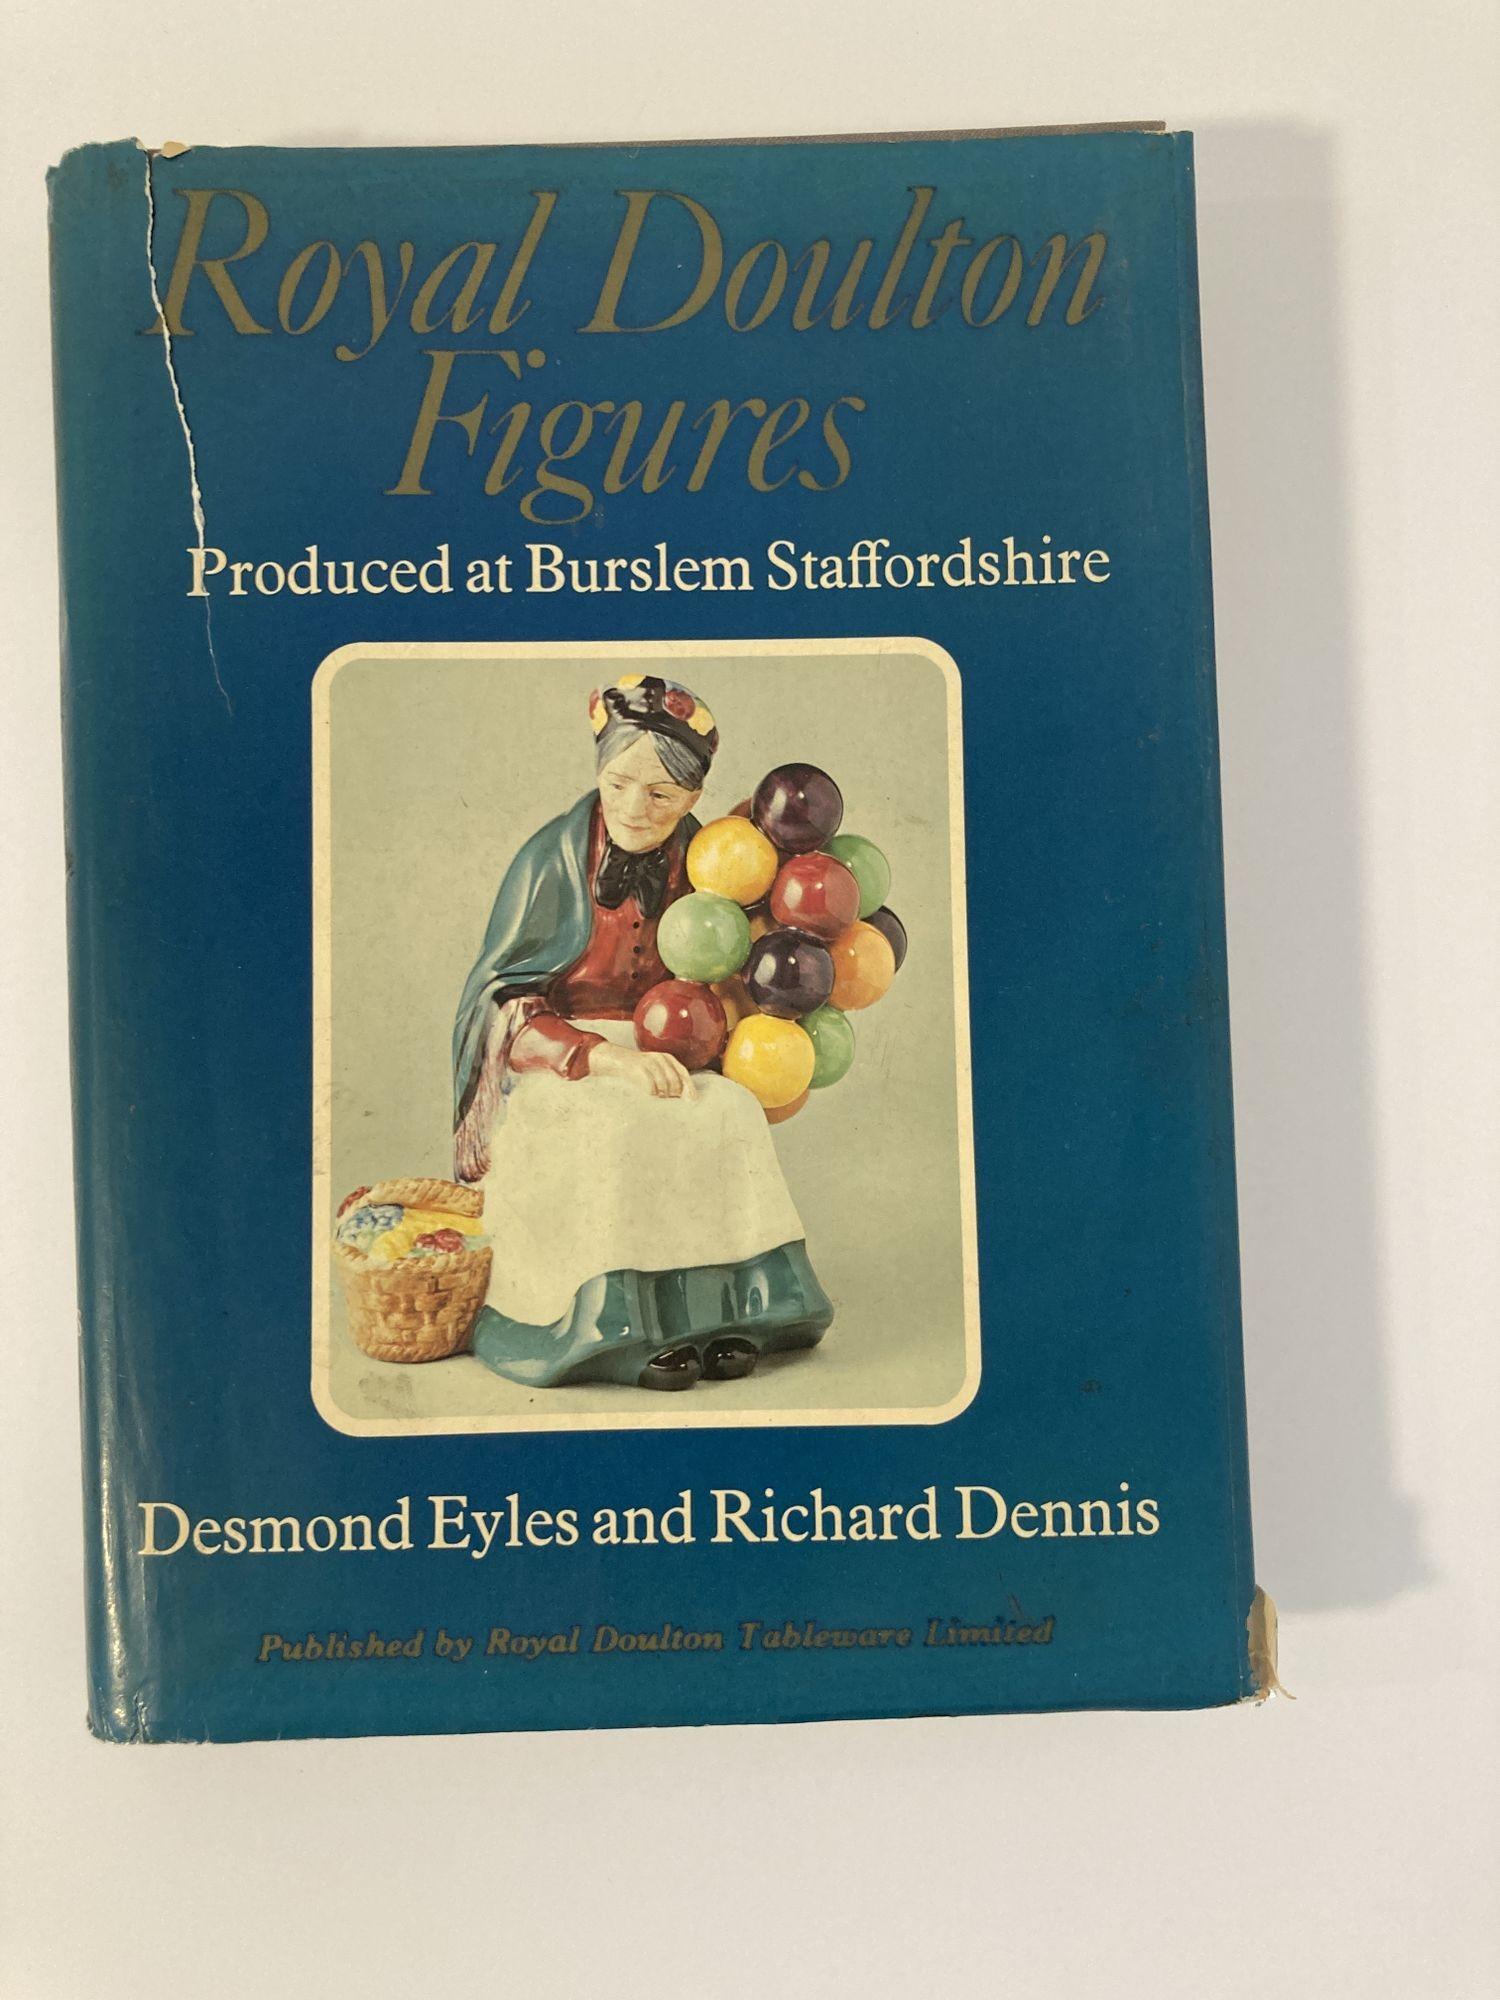 Royal Doulton Figures 1st Ed. 1st Printing, Hardcover Book 1978.
Royal Doulton Figures Produced at Berslem c1890 - 1978 Desmond Eyles & Richard Dennis.
Published by Royal Doulton Tableware Ltd, Stoke - on - Trent, 1978.
There are 432 pages and